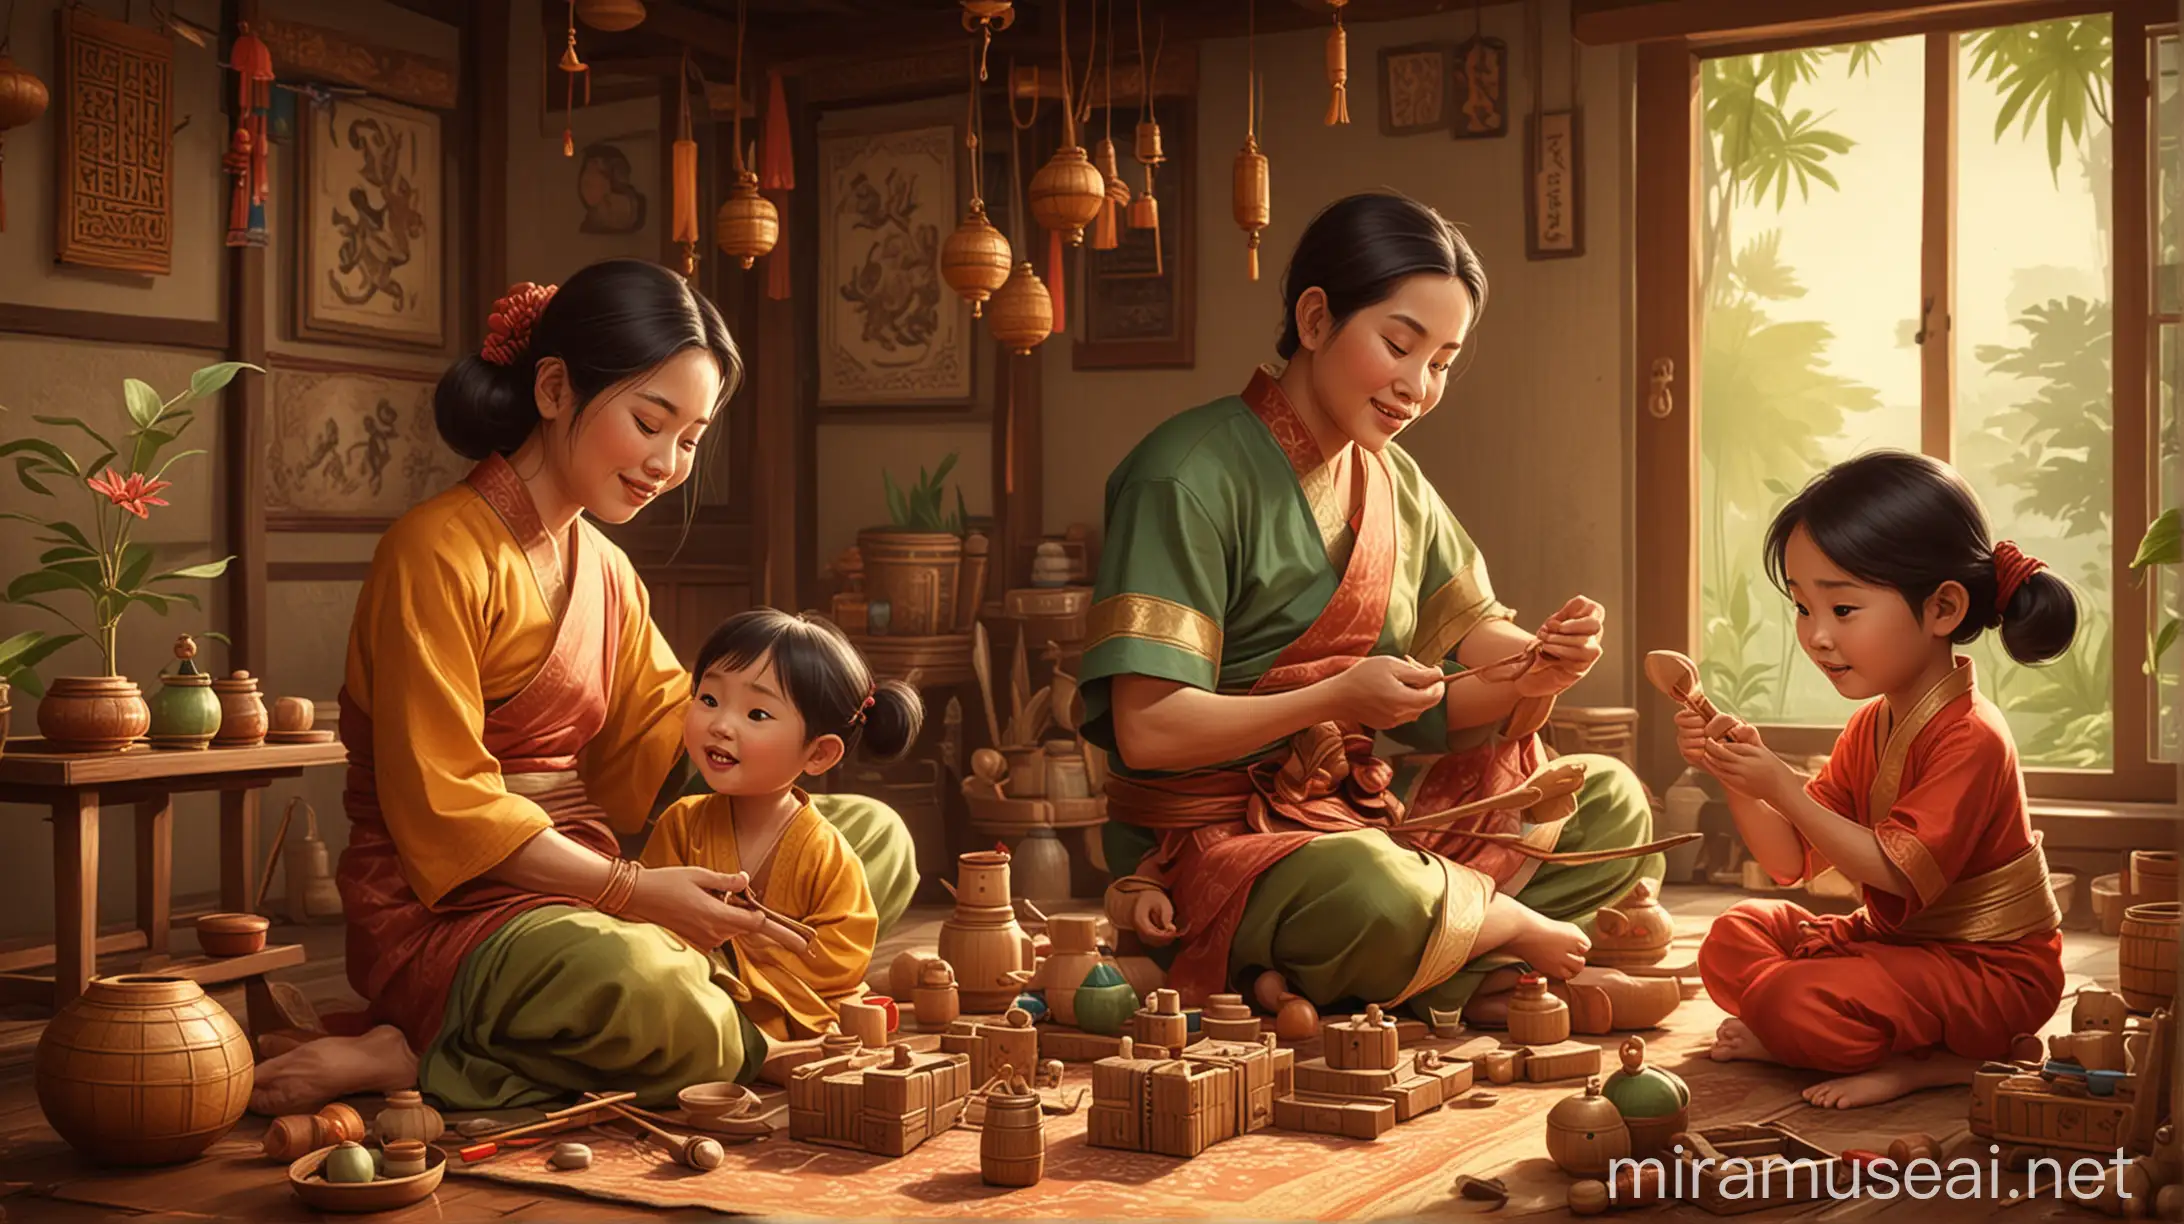 Southeast Asian Family Playing with Traditional Toys Cartoon Illustration